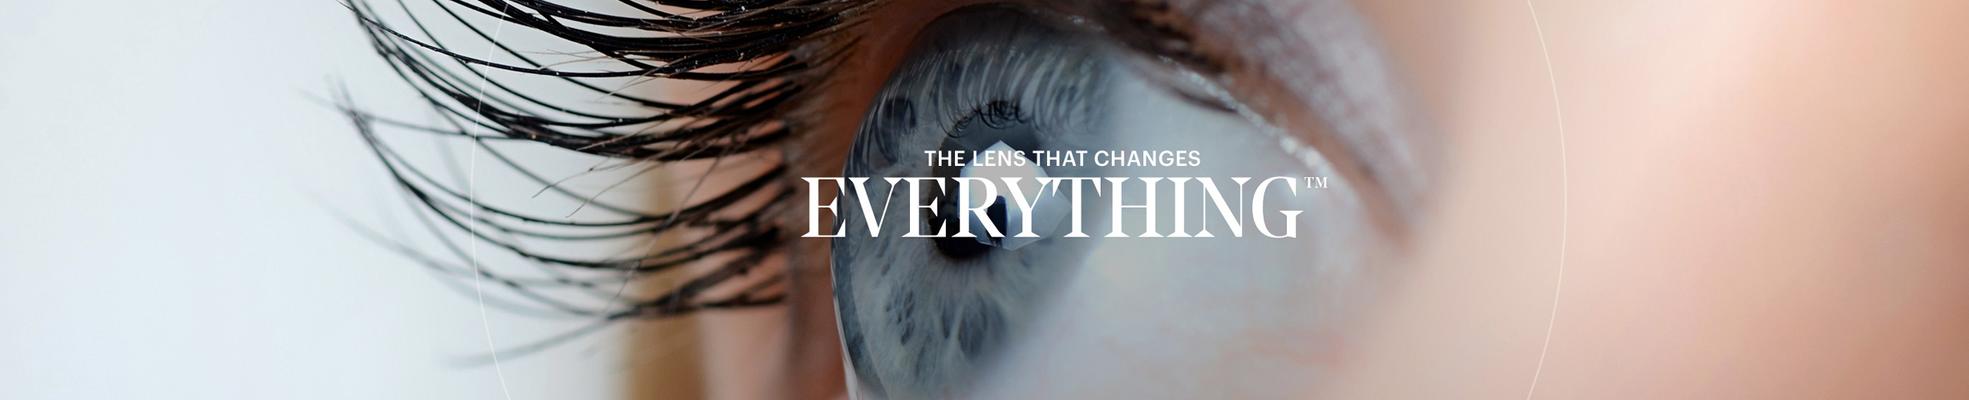 THE LENS THAT CHANGES EVERYTHING™